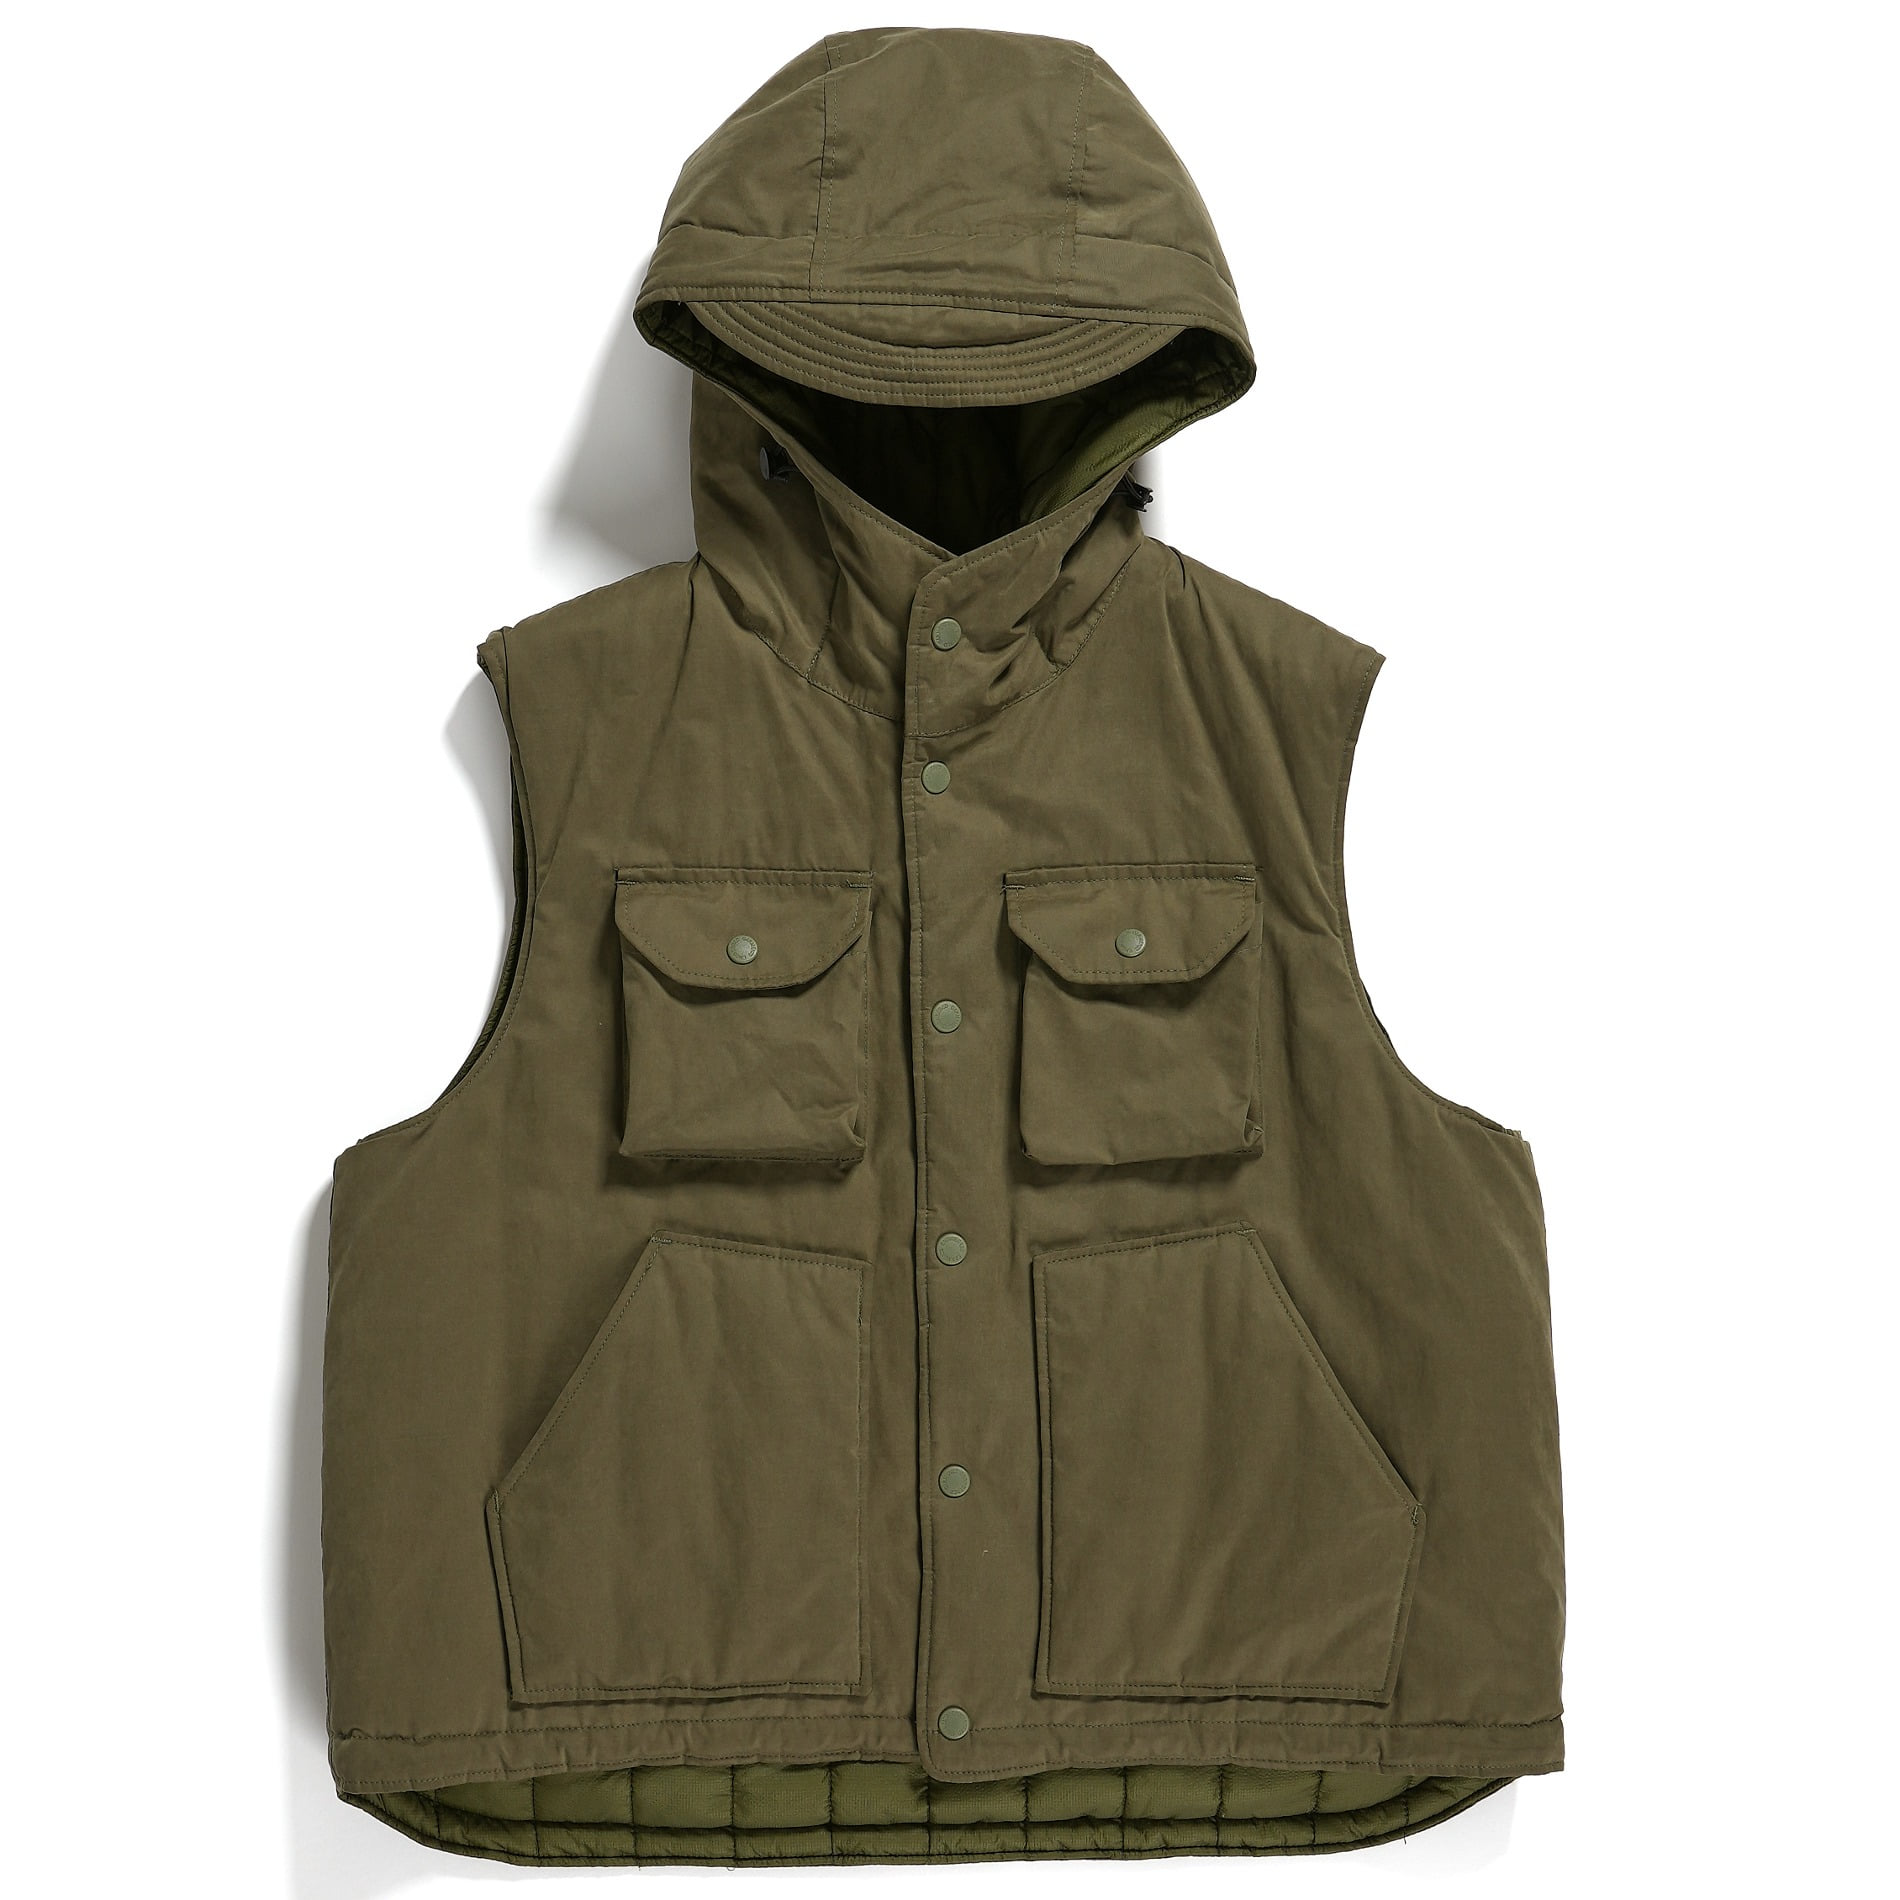 AW23 ENGINEERED GARMENTS FIELD VEST OLIVE PC COATED CLOTH